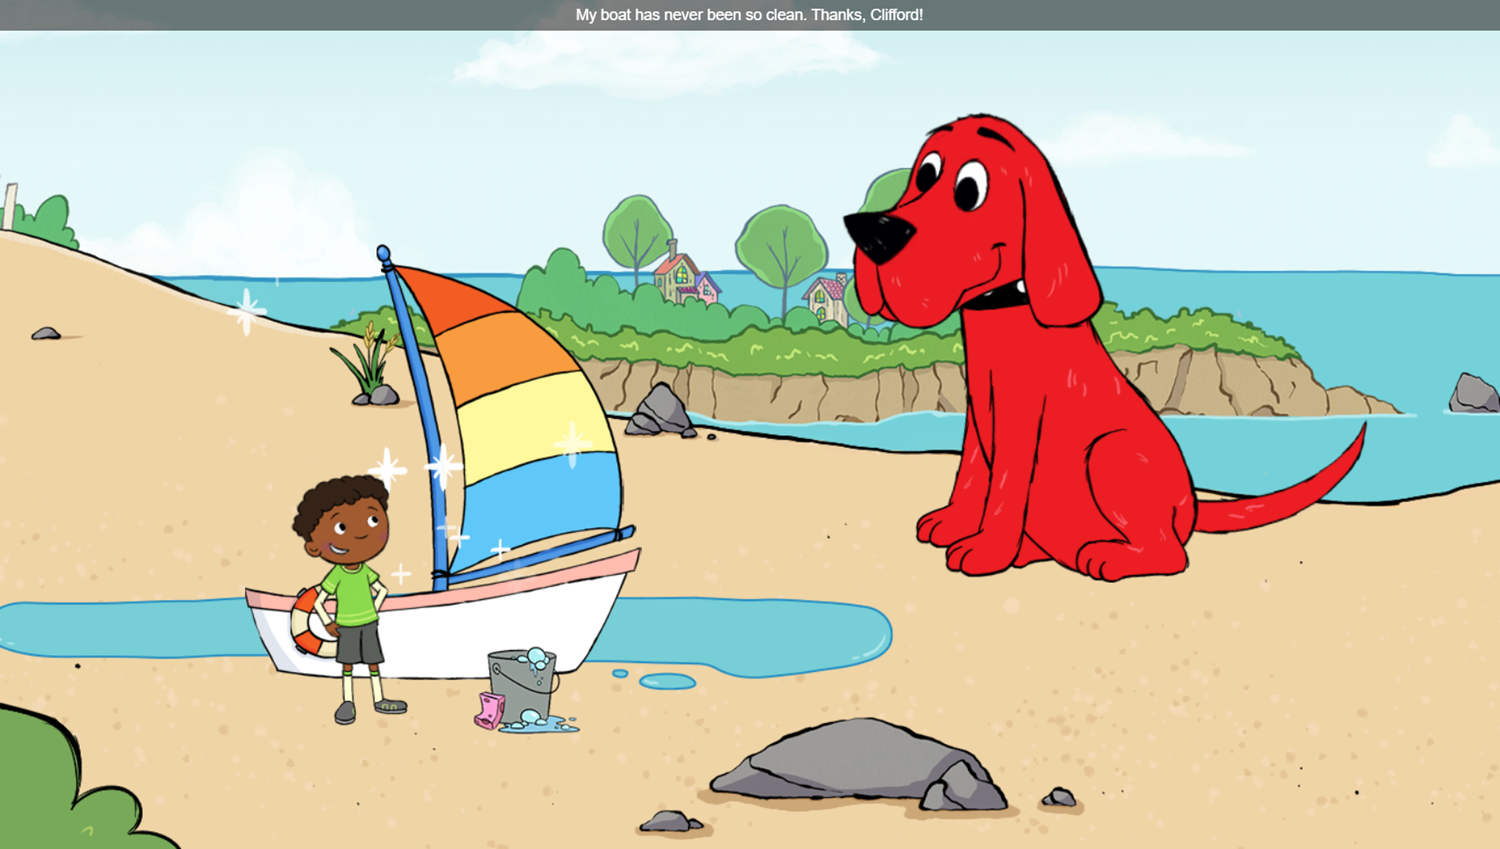 Clifford the Big Red Dog: All Around Birdwell Boat Cleaning Complete Screenshot.